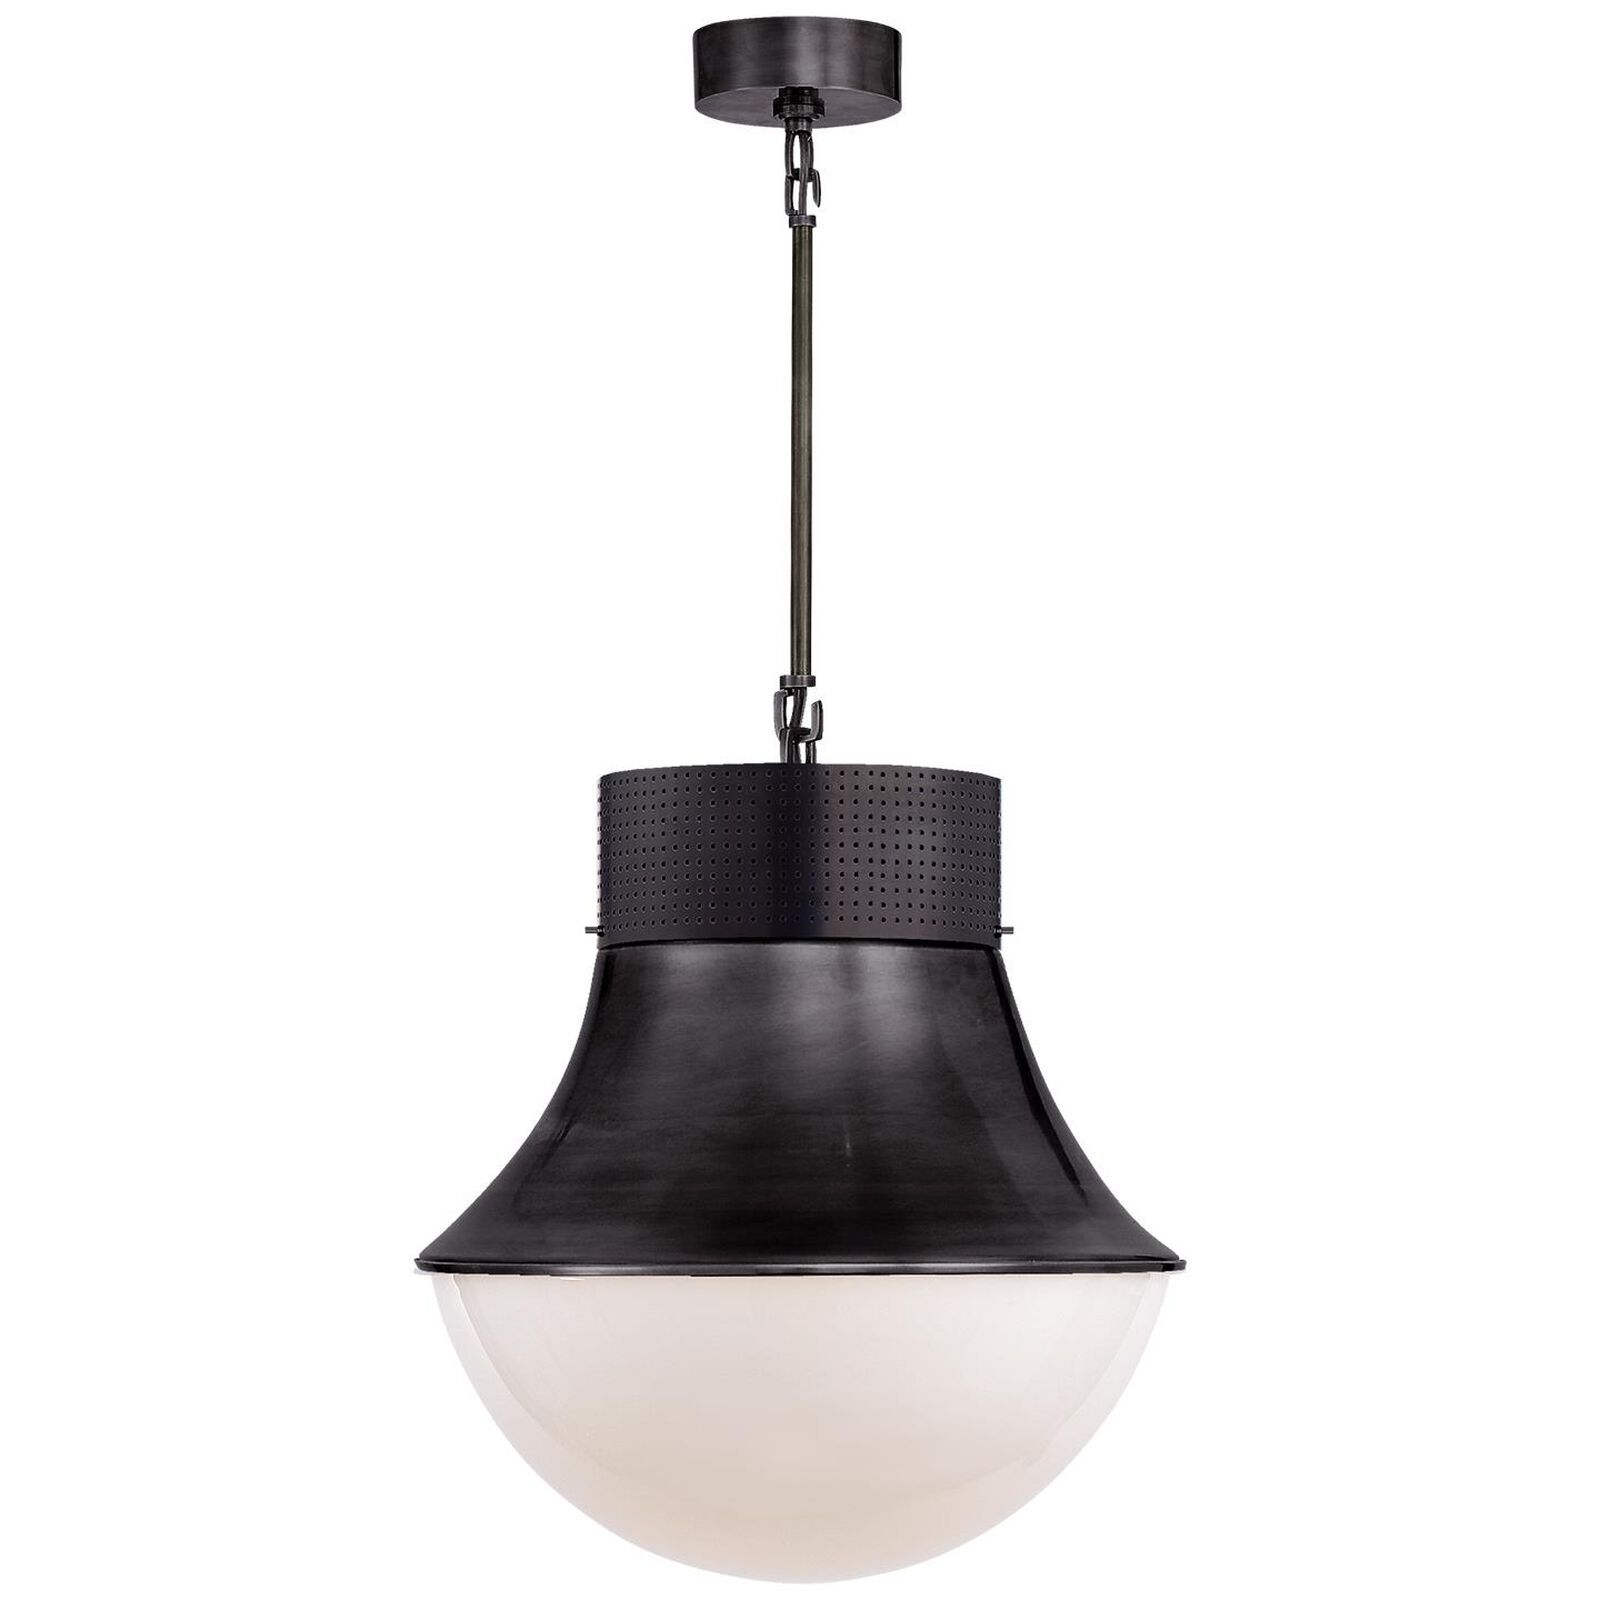 Kelly Wearstler Precision 17 Inch Mini Pendant by Visual Comfort and Co. | Capitol Lighting 1800lighting.com